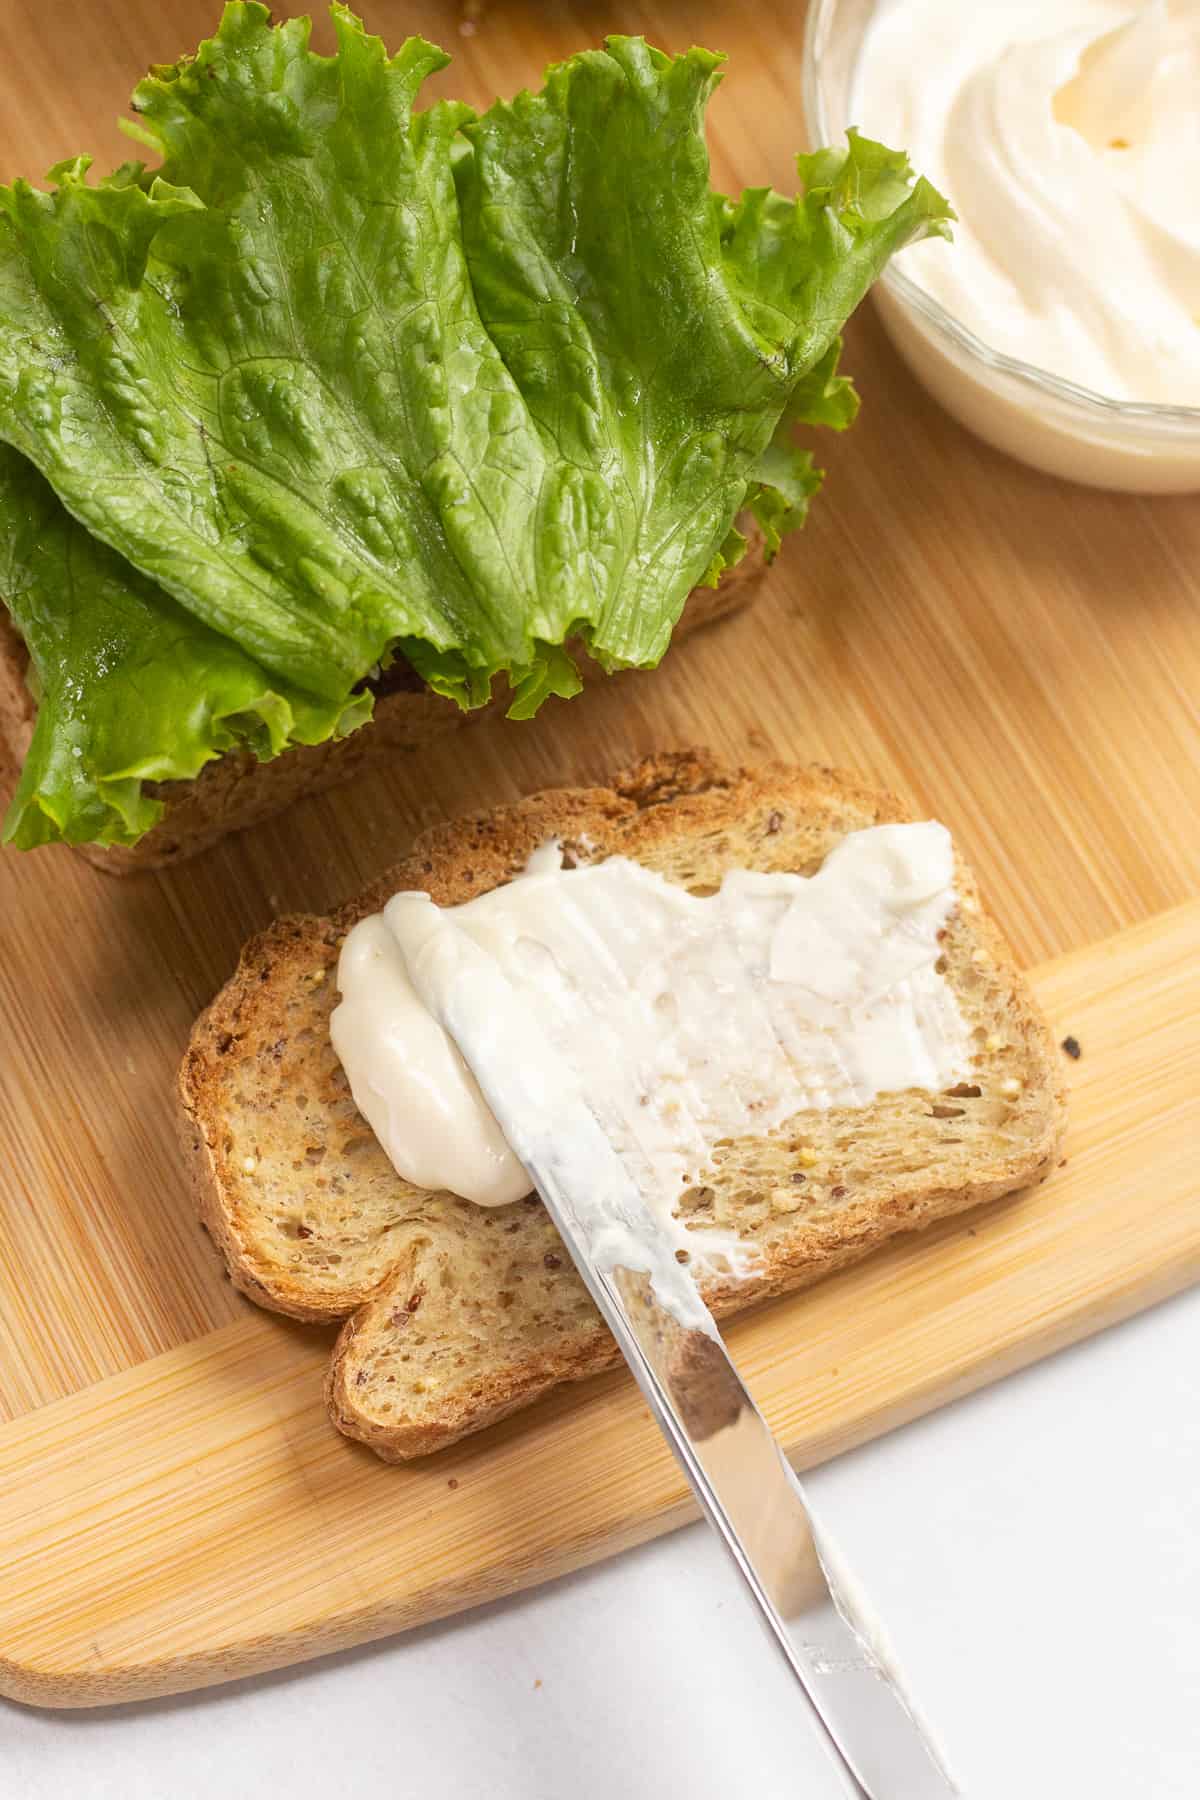 A table knife spreading mayo onto a toasted piece of bread on top of a wood cutting board.